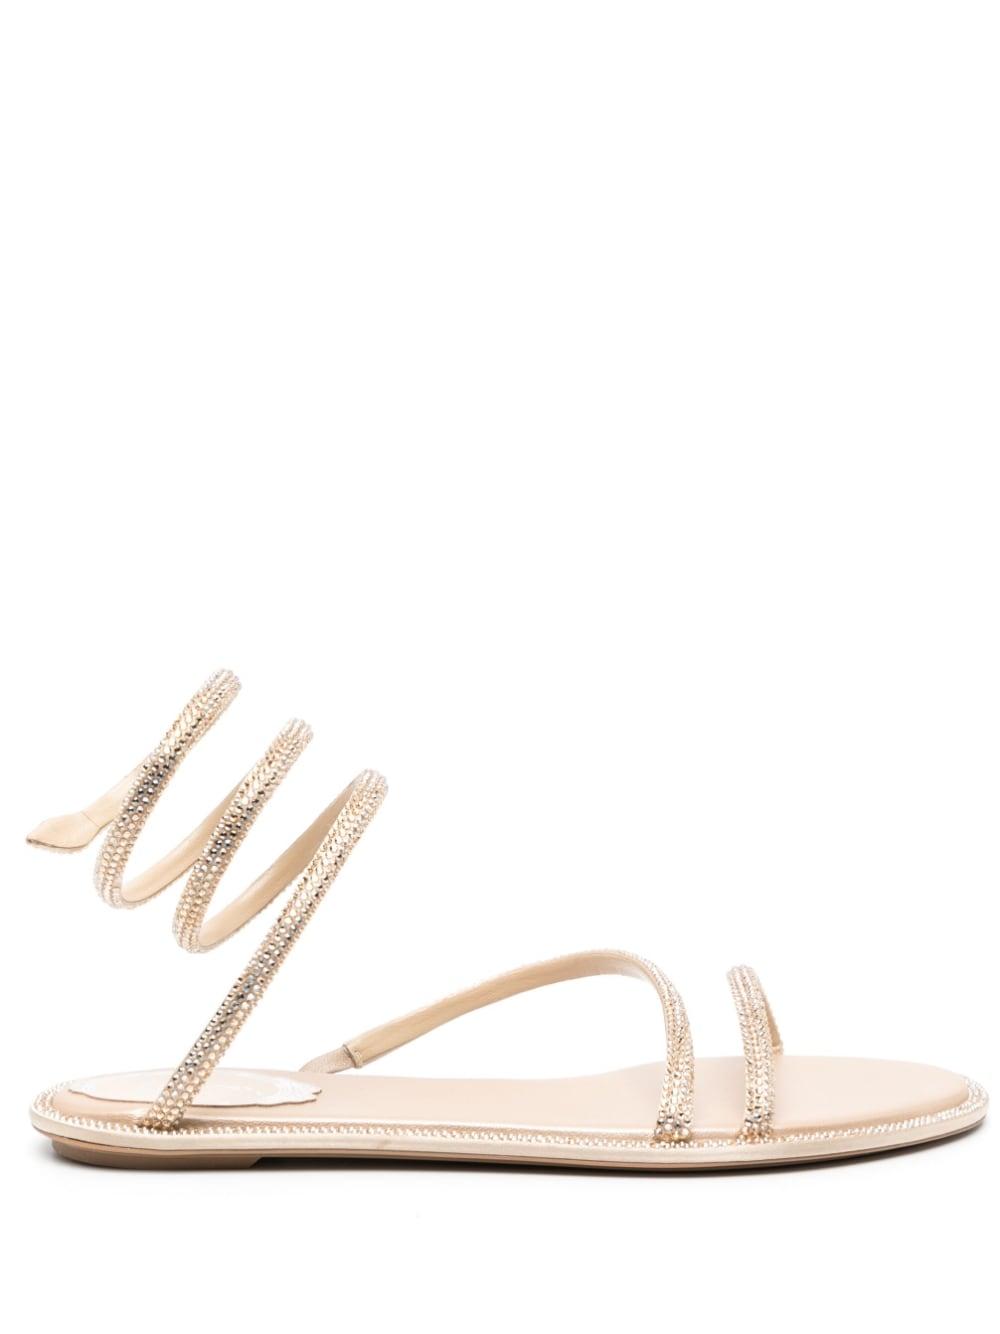 Rene Caovilla Crystal-embellished Flat Sandals in White | Lyst